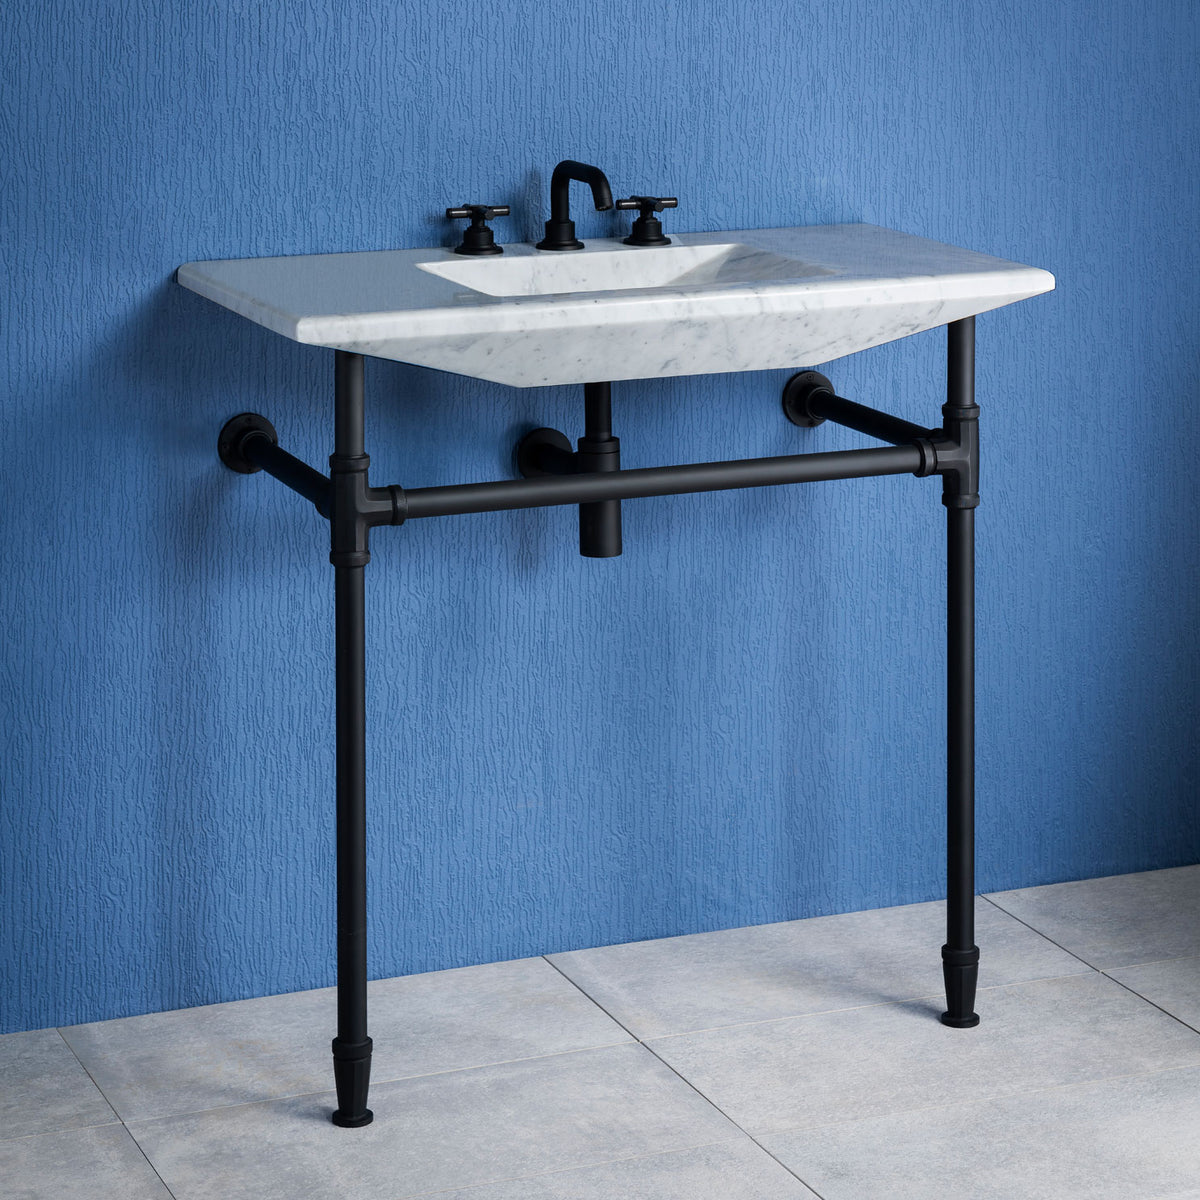 Stone Forest Cortina Console Sink carved from a single block of carrara marble paired with matte black Elemental Facet Legs with Crossbar. image 1 of 3